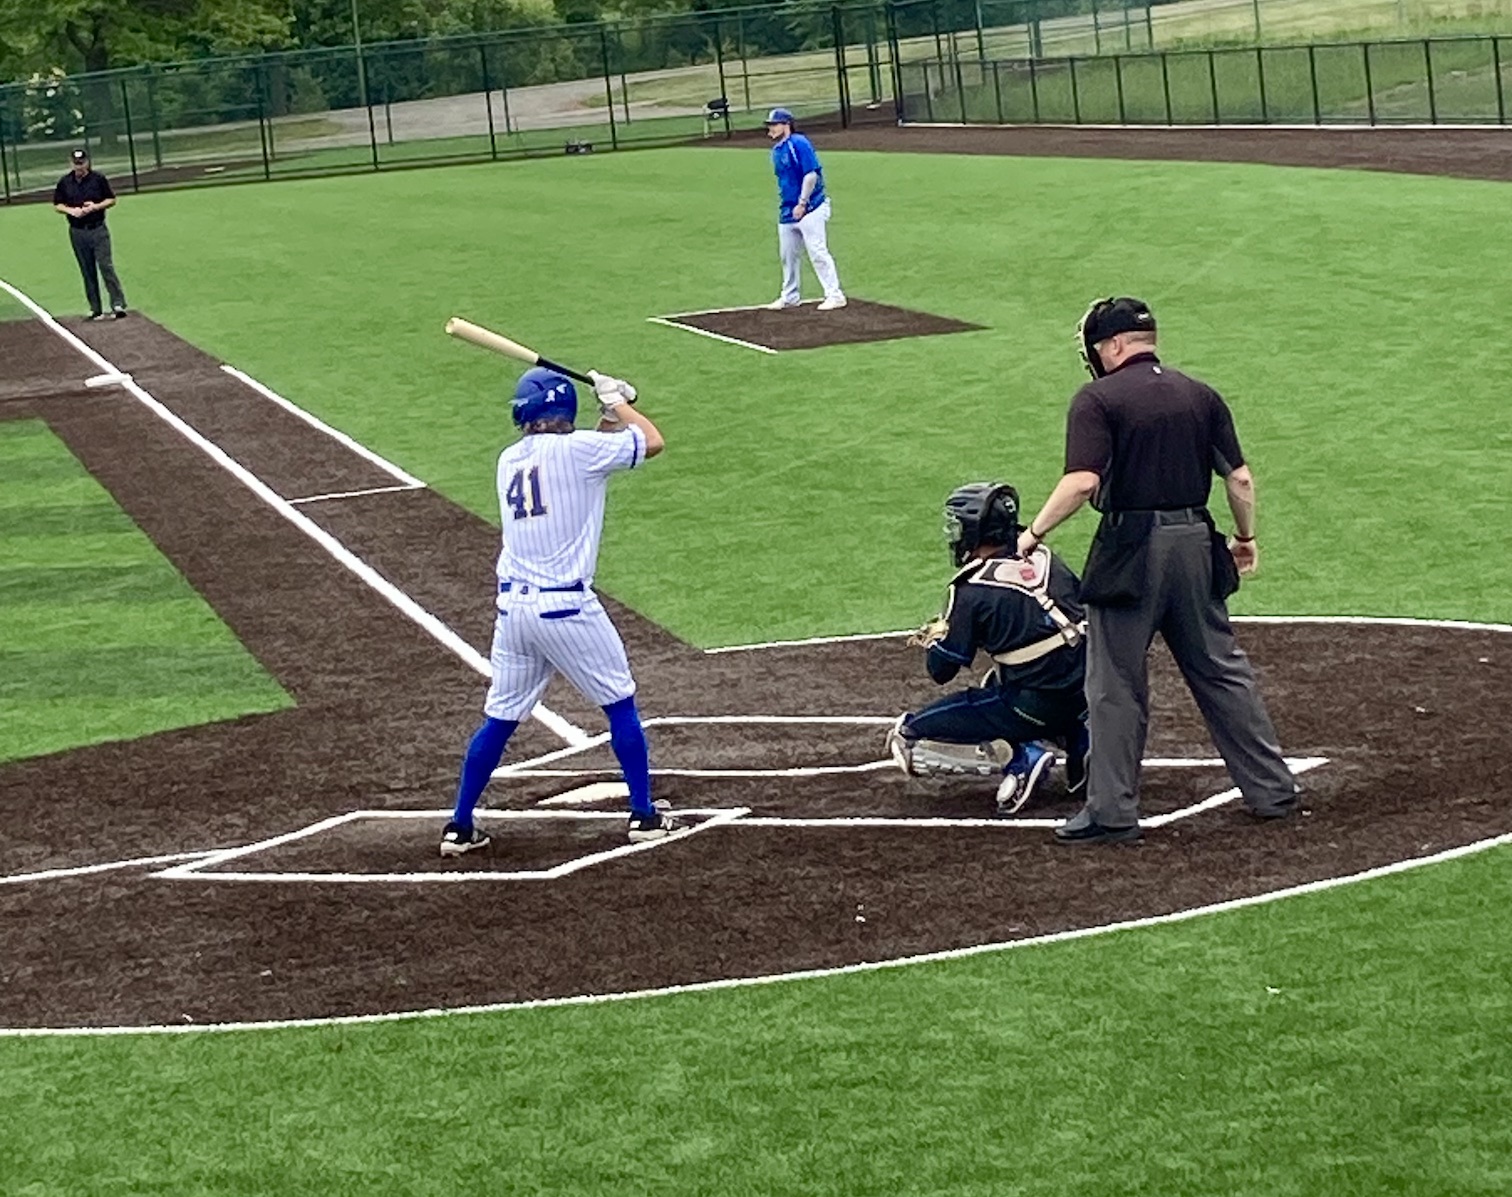 Niagara Power second baseman Billy Morris, a sophomore at D'Youville University, steps up to the plate at the upgraded and rededicated Sal Maglie Stadium. The entire field has been converted to artificial turf. The Power Play in the Perfect Game Collegiate Baseball League.